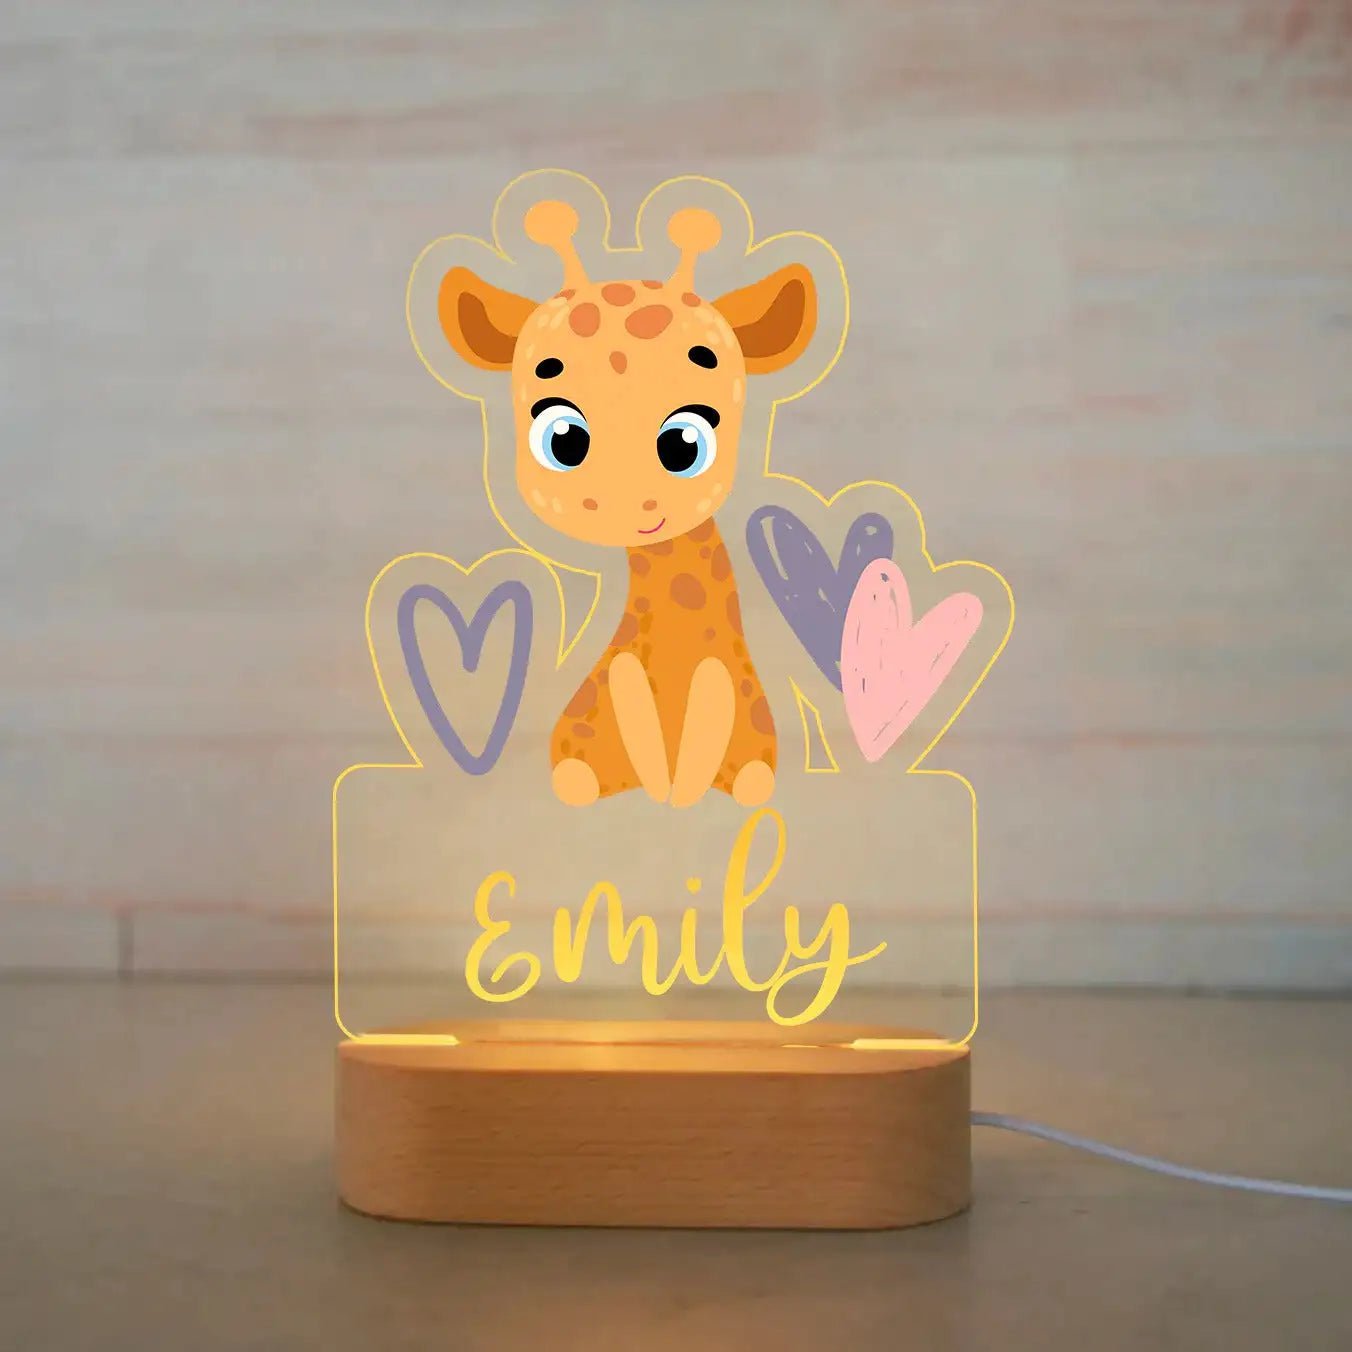 Customized Animal-themed Night Light for Kids - Personalized with Child's Name, Acrylic Lamp for Bedroom Decor Warm Light / 09Giraffe